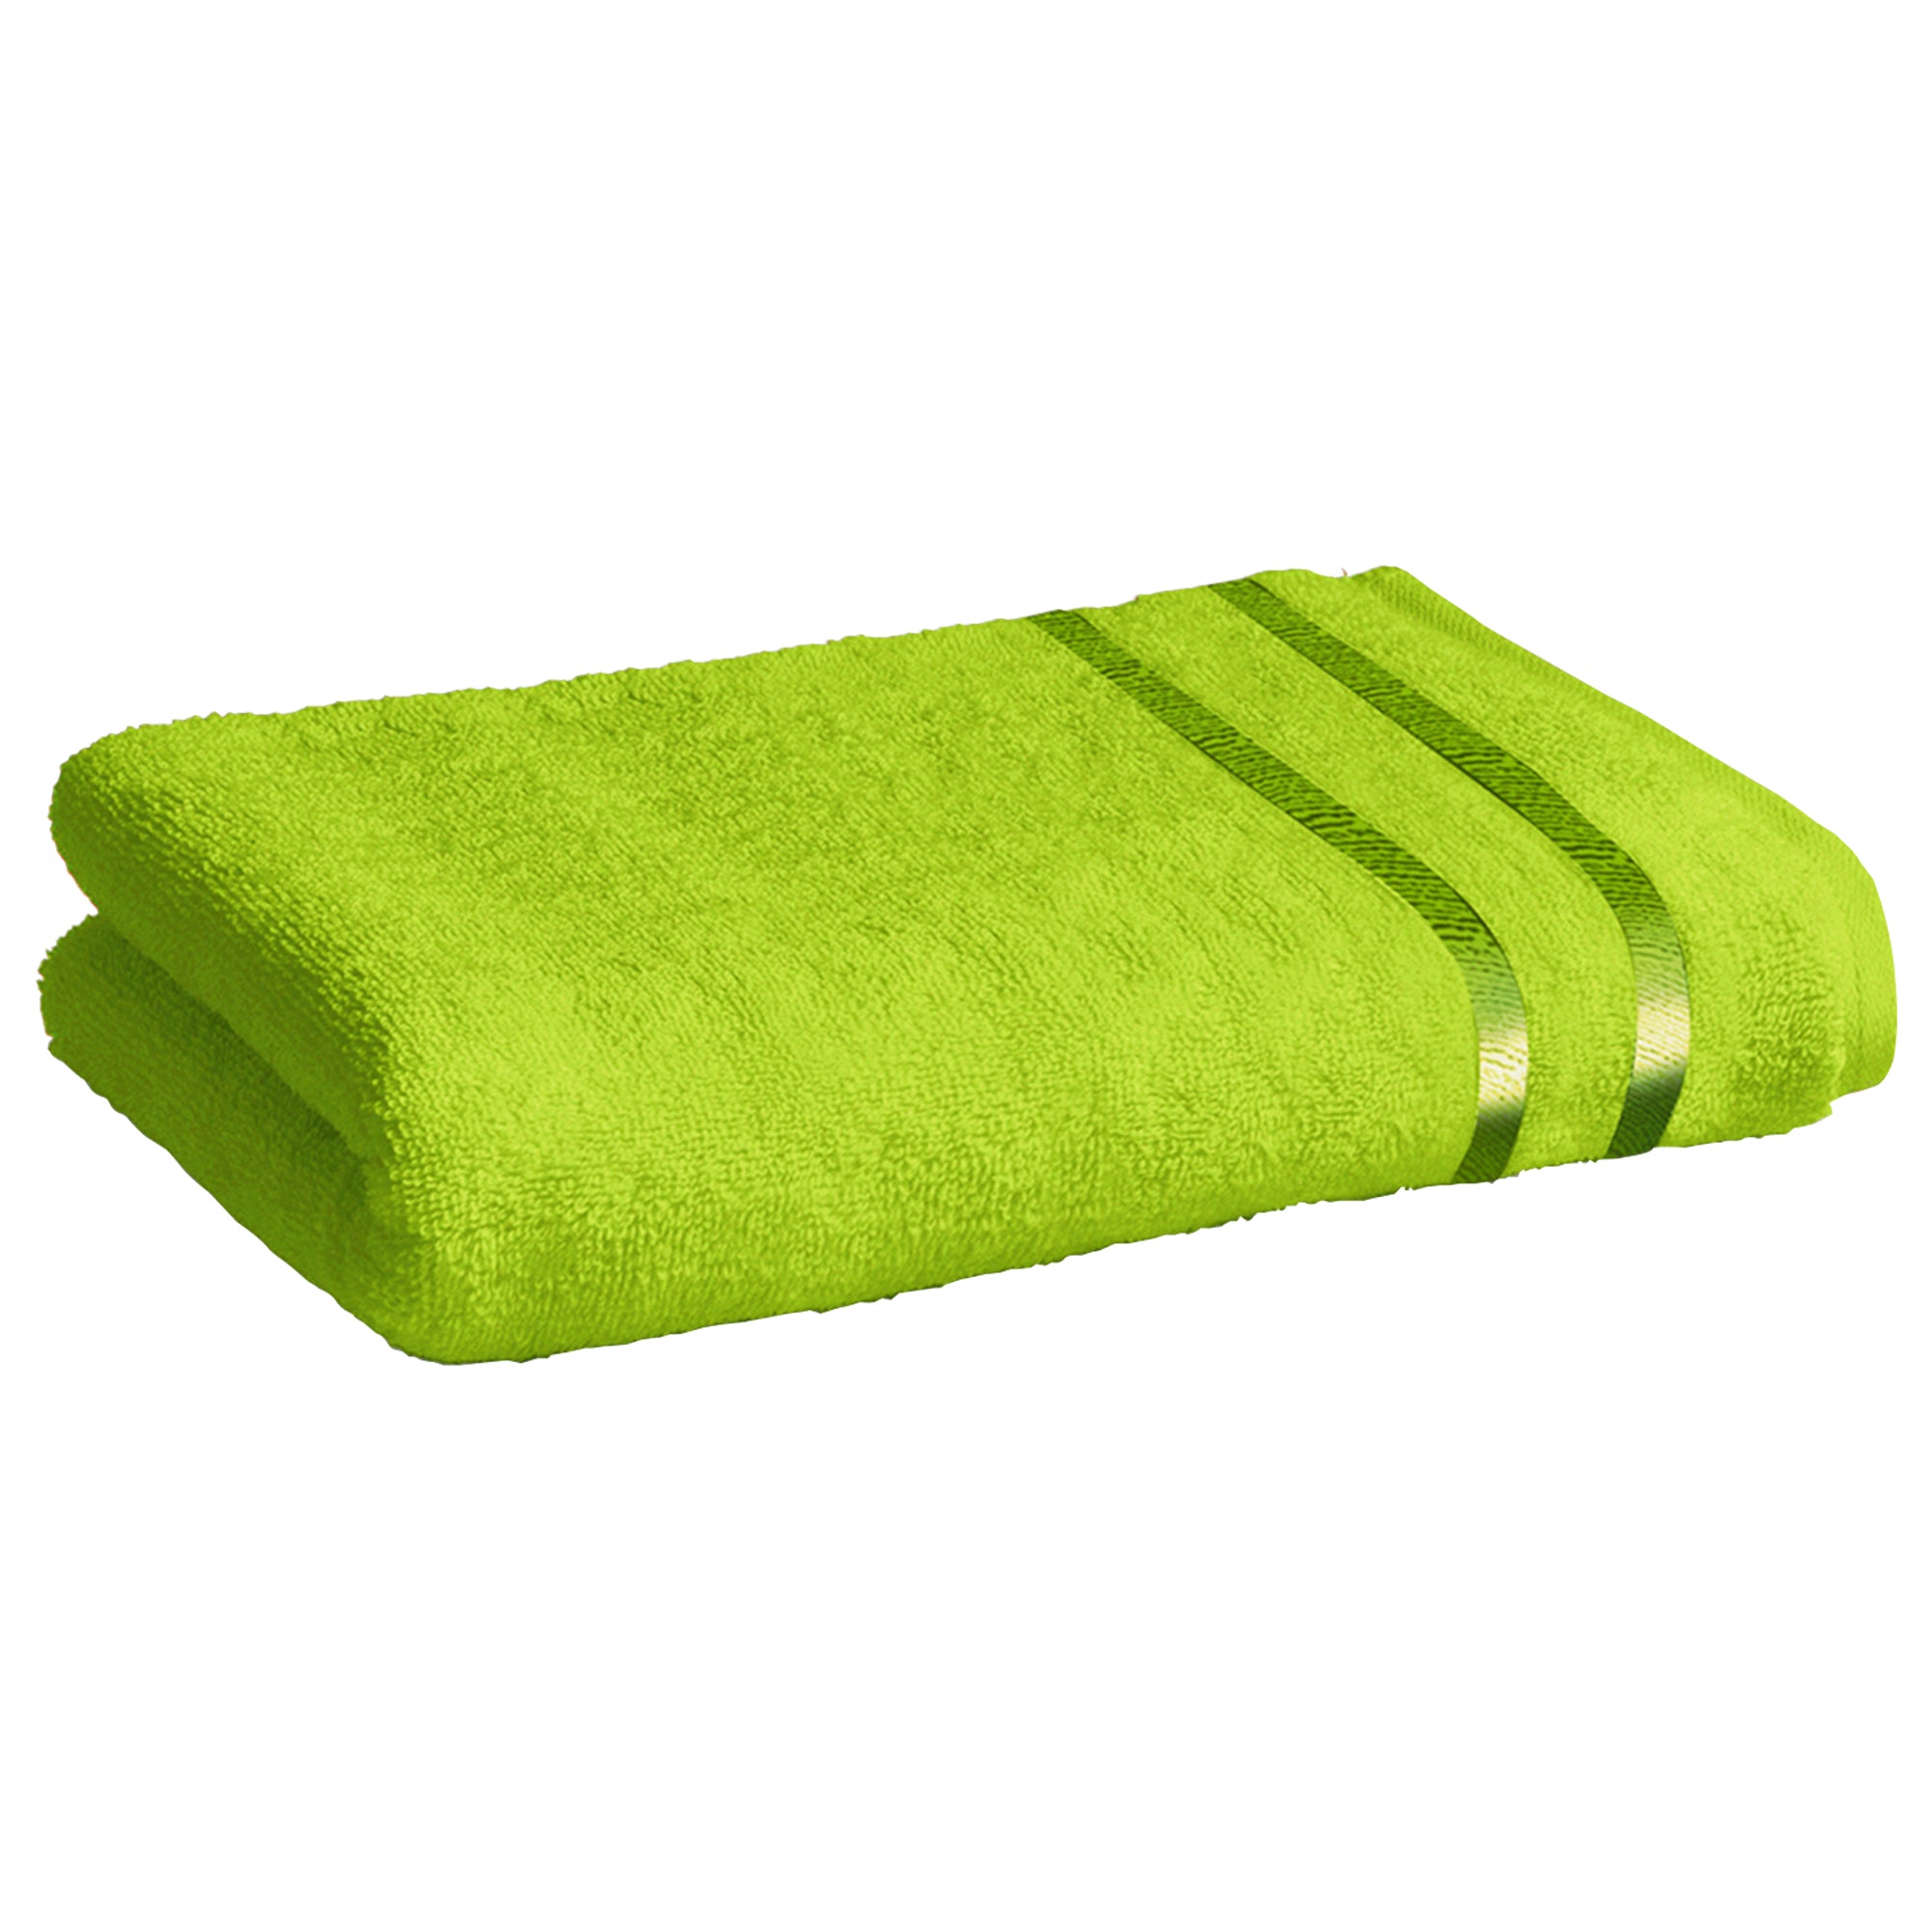 Story@Home 2 Units 100% Cotton Bath Towels - Green and Blue